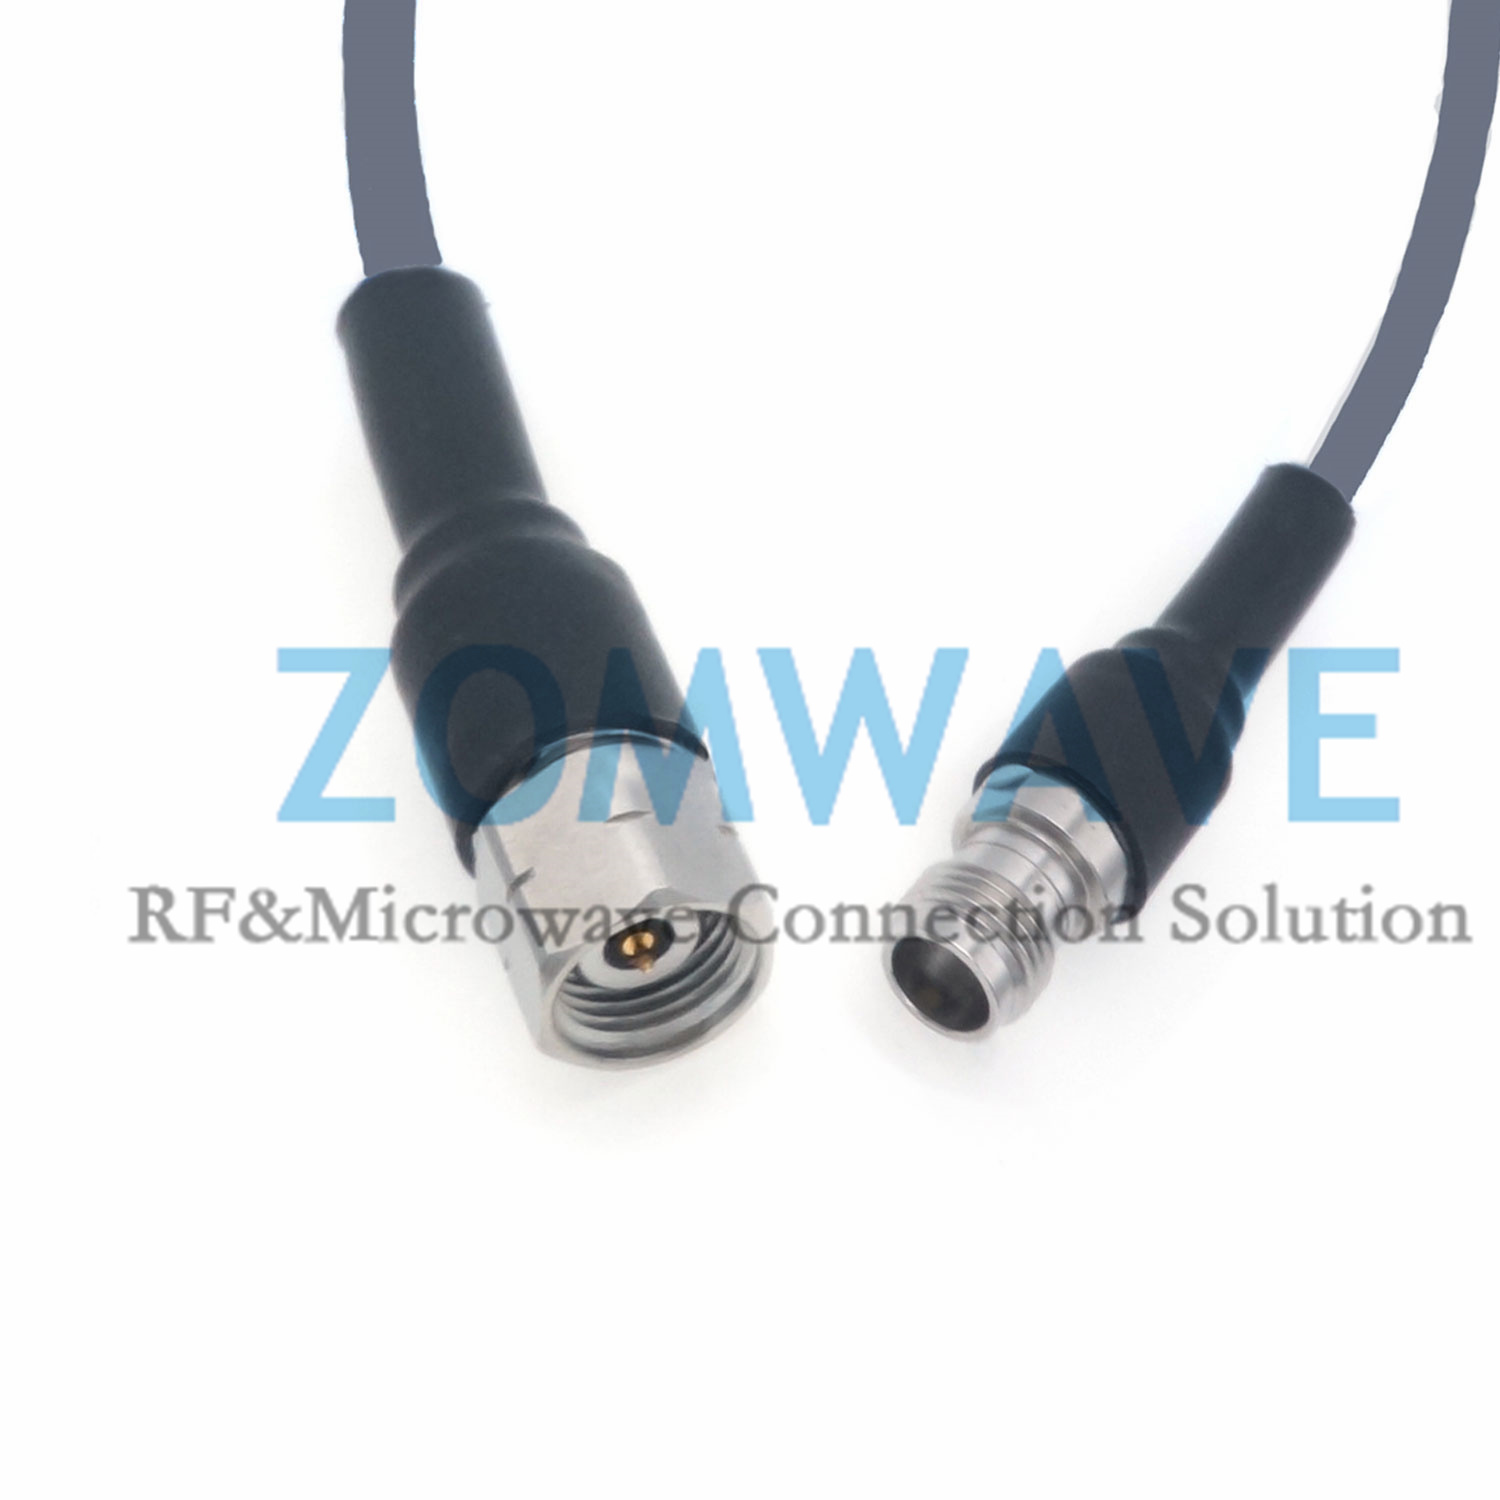 2.4mm Male to 2.4mm Female, Flexible ZCXN 3506 Cable, 50GHz